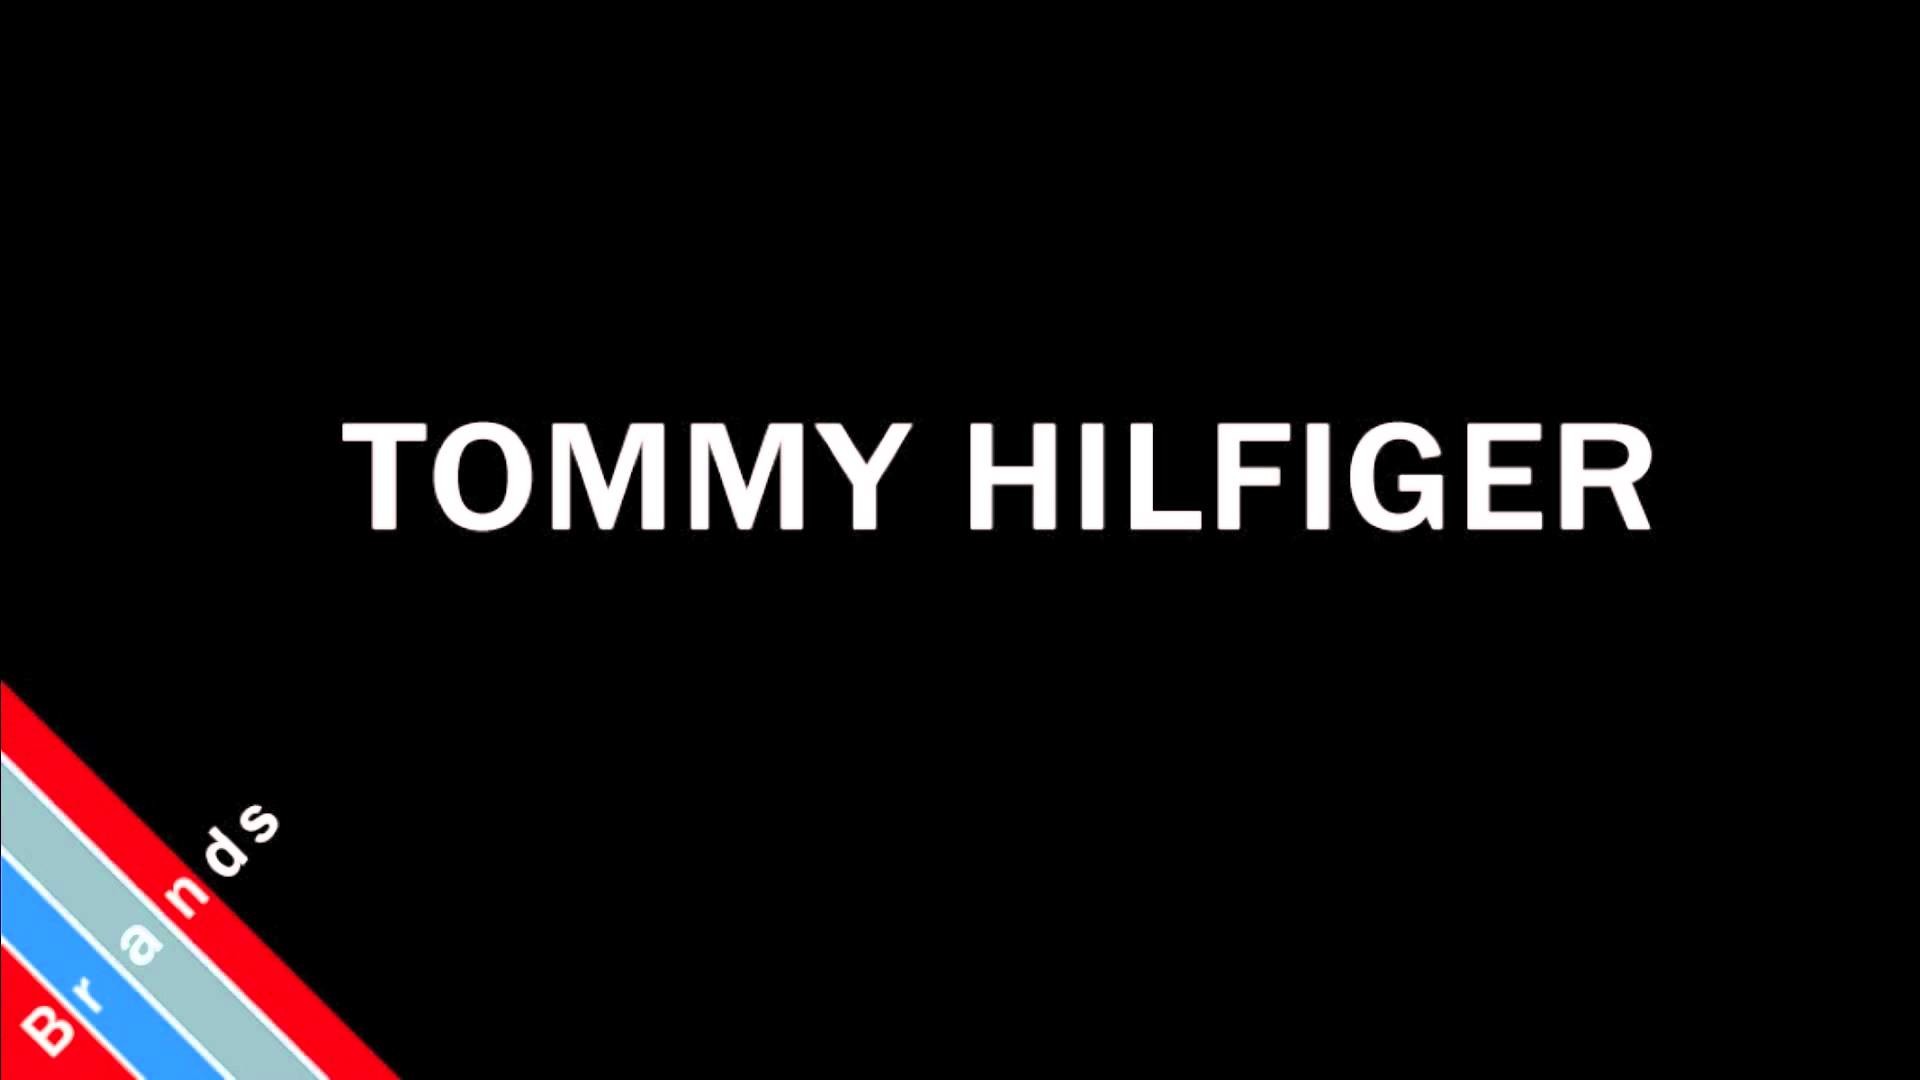 1920x1080 How to Pronounce TOMMY HILFIGER - YouTube